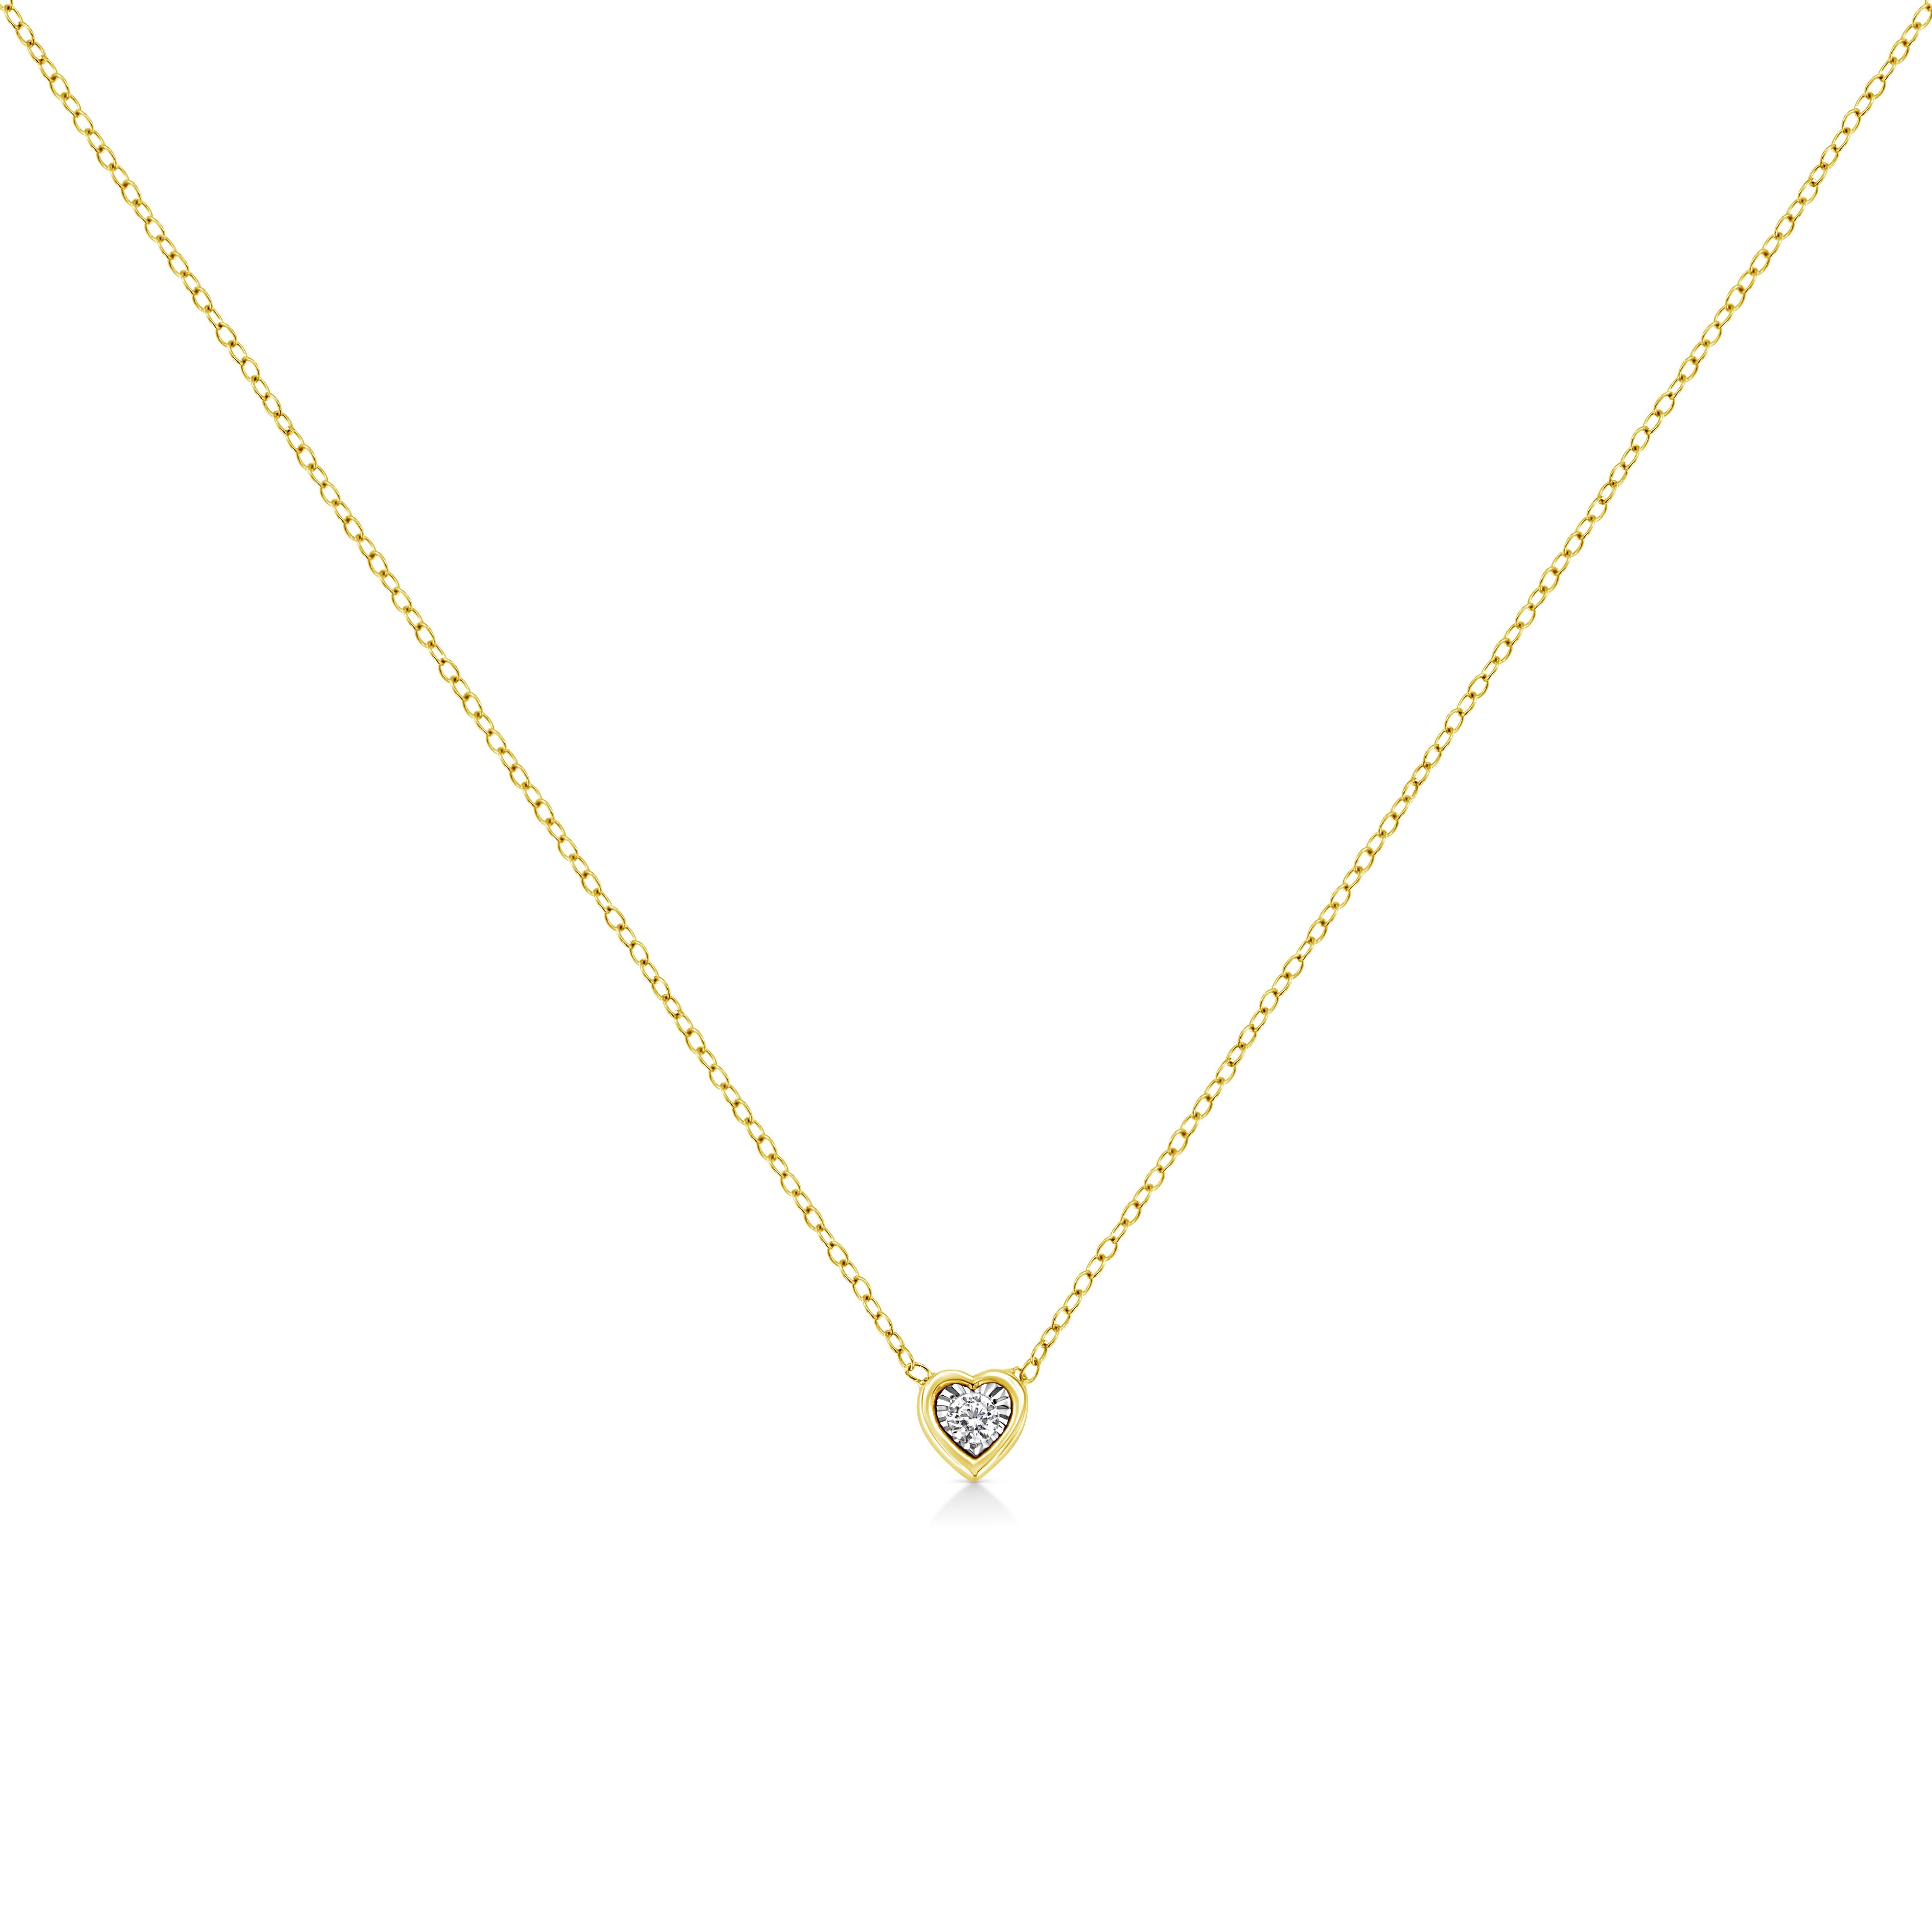 Haven’t we all had the dream of getting ready like a queen for that special day. This heart shaped diamond pendant necklace is designed for that queen in you. This 10k Yellow Gold Plated .925 Sterling SIlver pendant is studded with a single 1/10